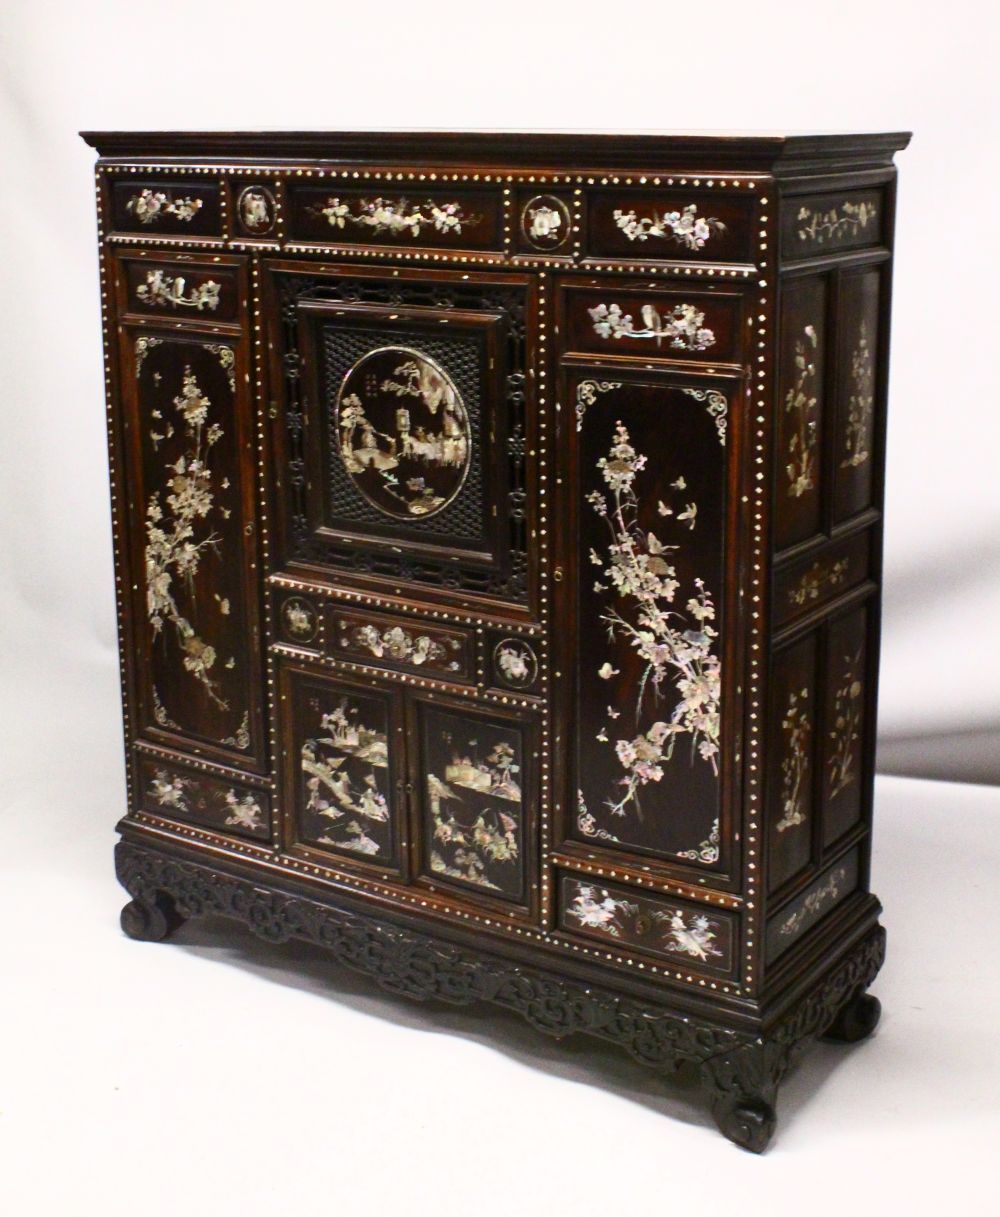 A 20TH CENTURY ROYAL VIETNAM INLAID AND SIGNED MOTHER OF PEARL CABINET, the cabinet with 9 panels of